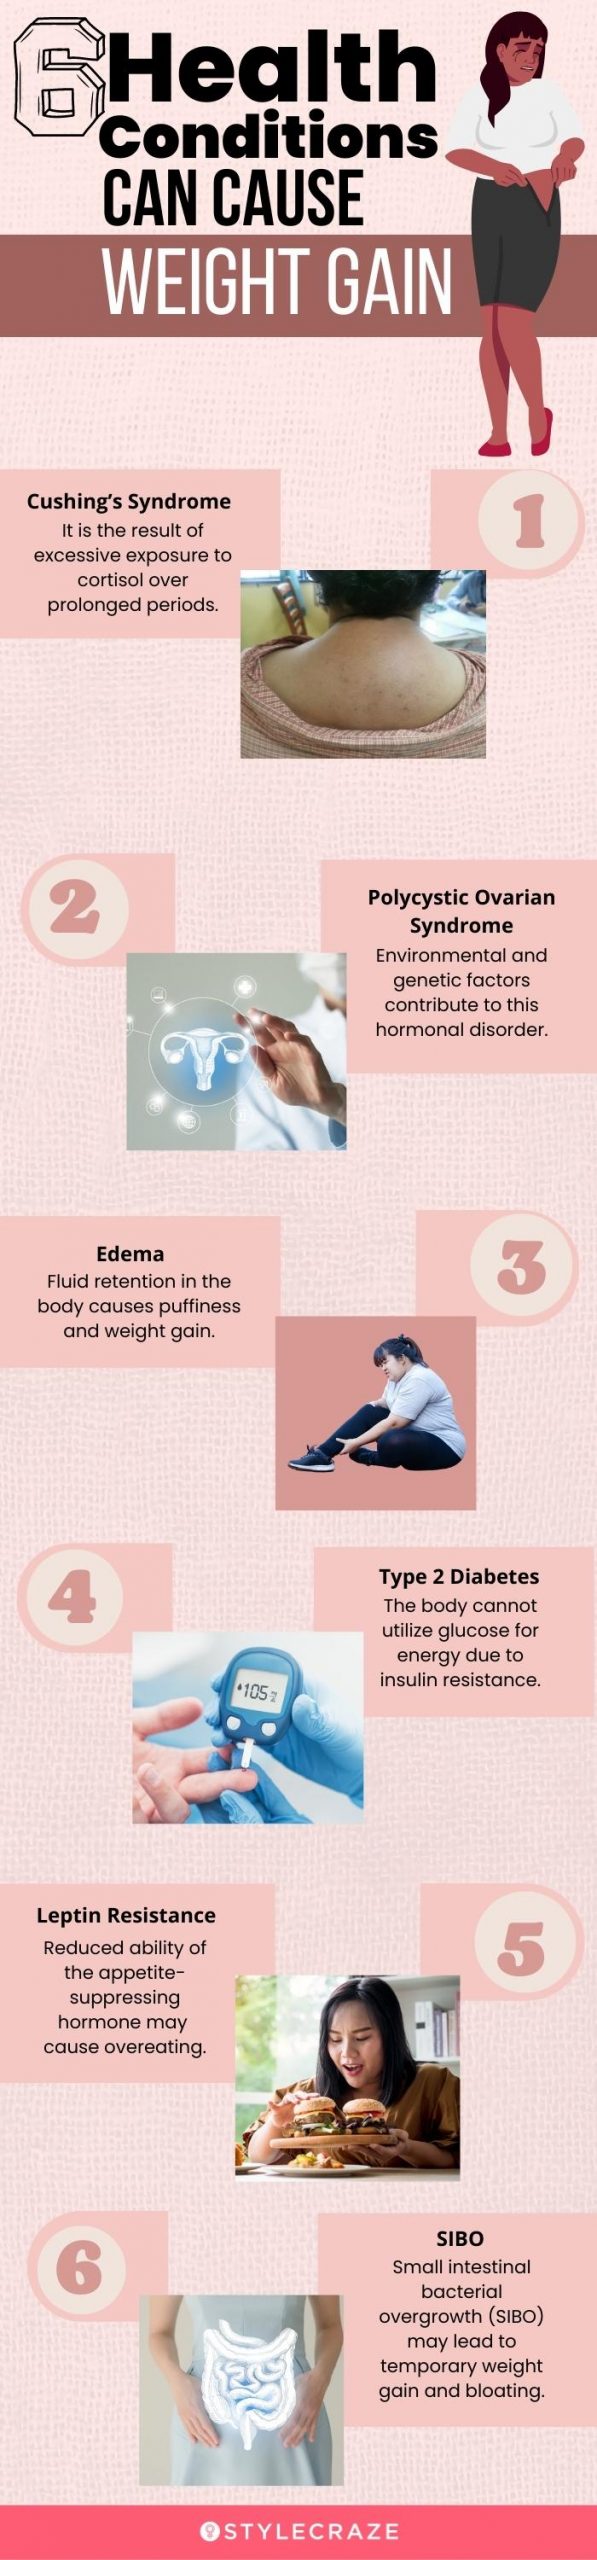 6 health conditions can cause weight gain (infographic)